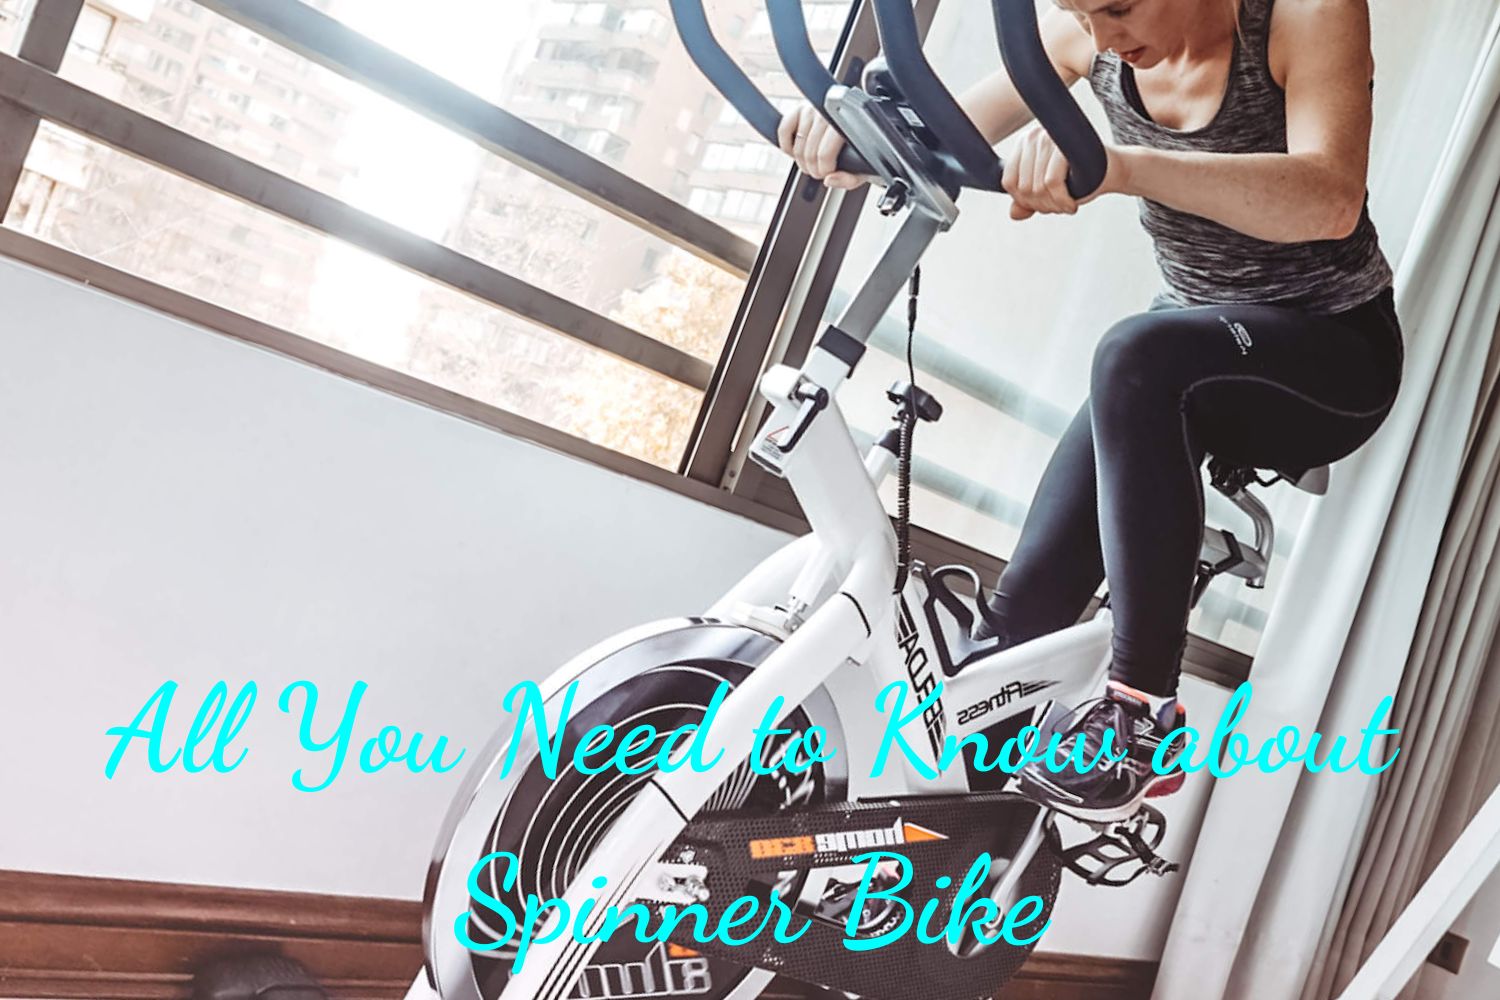 All You Need to Know about Spinner Bike